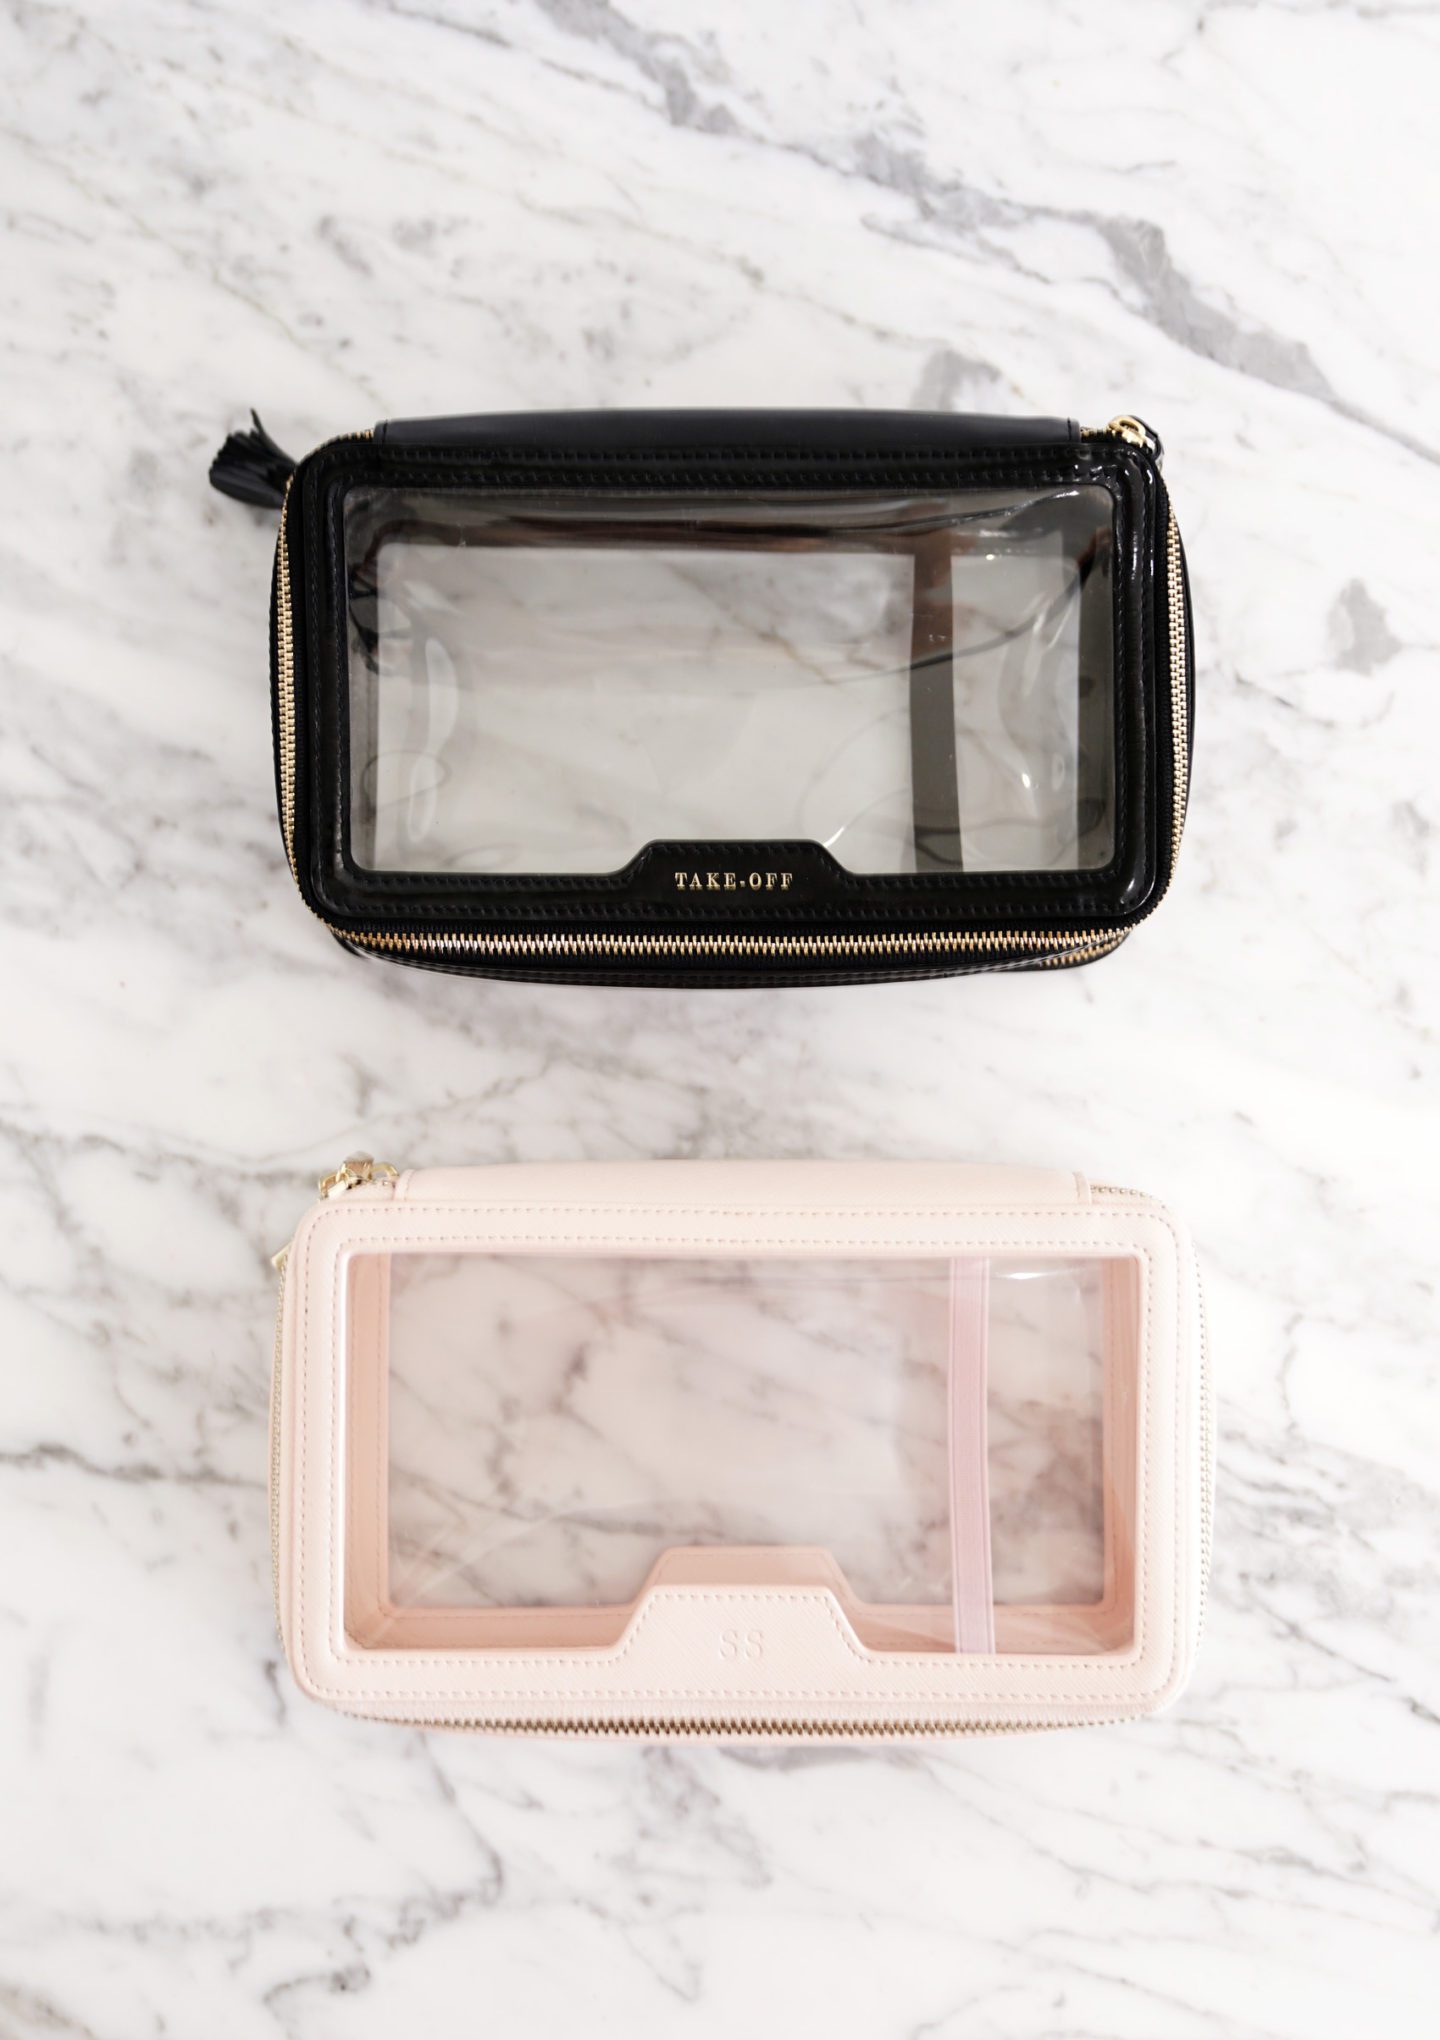 The Daily Edited Transparent Cosmetic Case vs Anya Hindmarch Inflight Travel Case | The Beauty Look Book